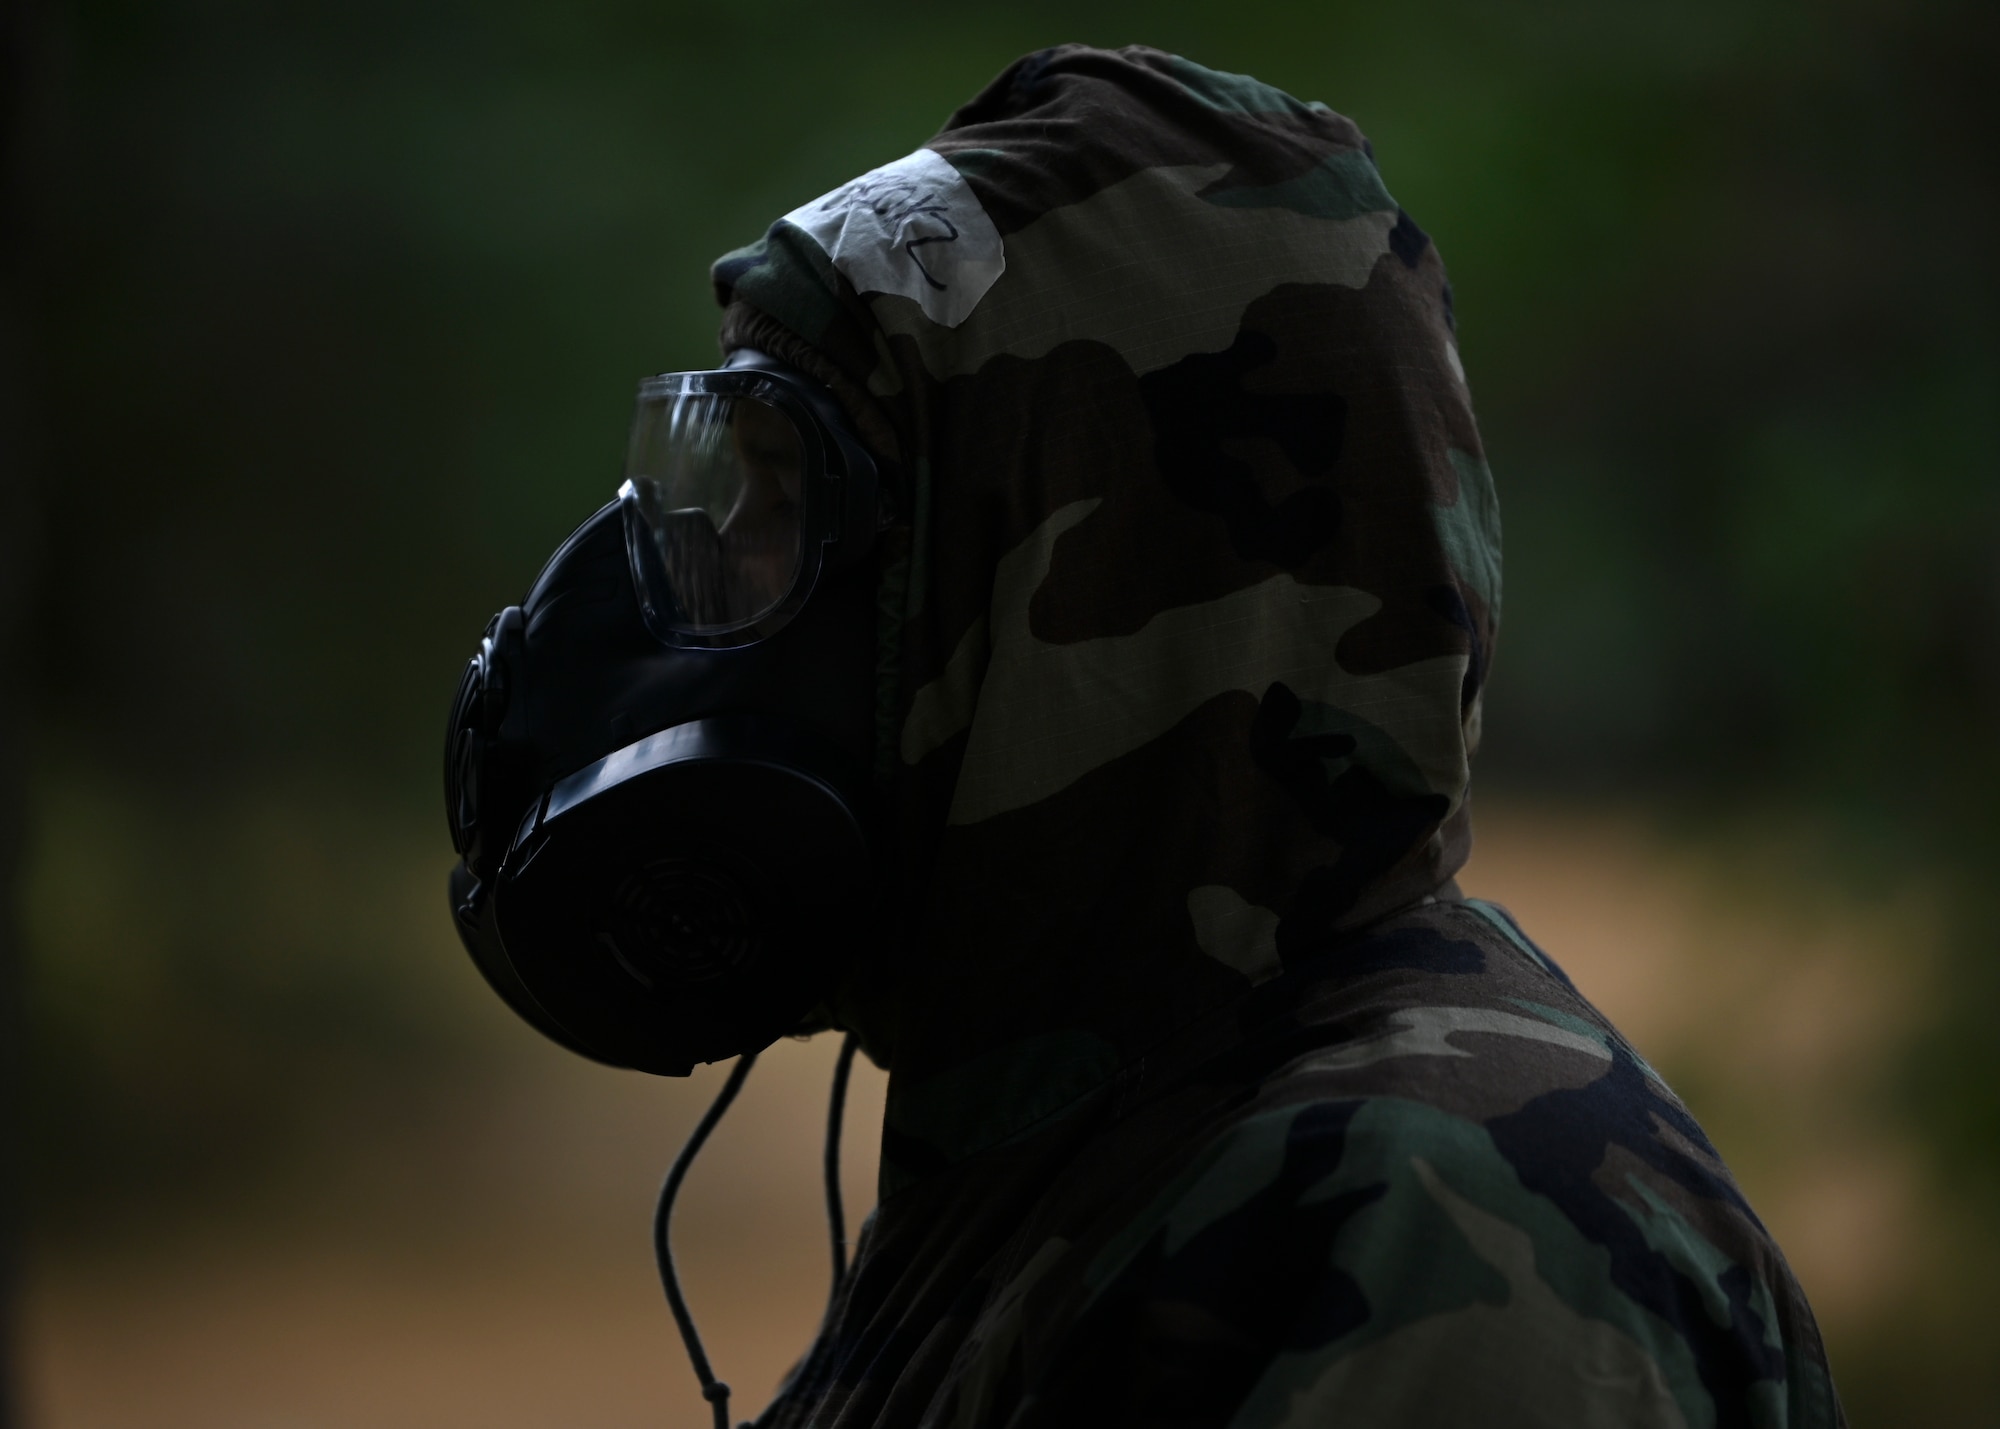 U.S. Air Force Staff Sgt. Michael Blackburn, power production craftsman with the 627th Civil Engineer Squadron, prepares to enter the gas chamber during a joint exercise at Joint Base Lewis-McChord, Washington, Aug. 26, 2022. The 627th CES partnered with the 349th Chemical Company for a chemical, biological, radiological, and nuclear exercise to ensure Airmen are proficient in using a gas mask to prepare them for a biological or chemical attack. (U.S. Air Force photo by Senior Airman Callie Norton)